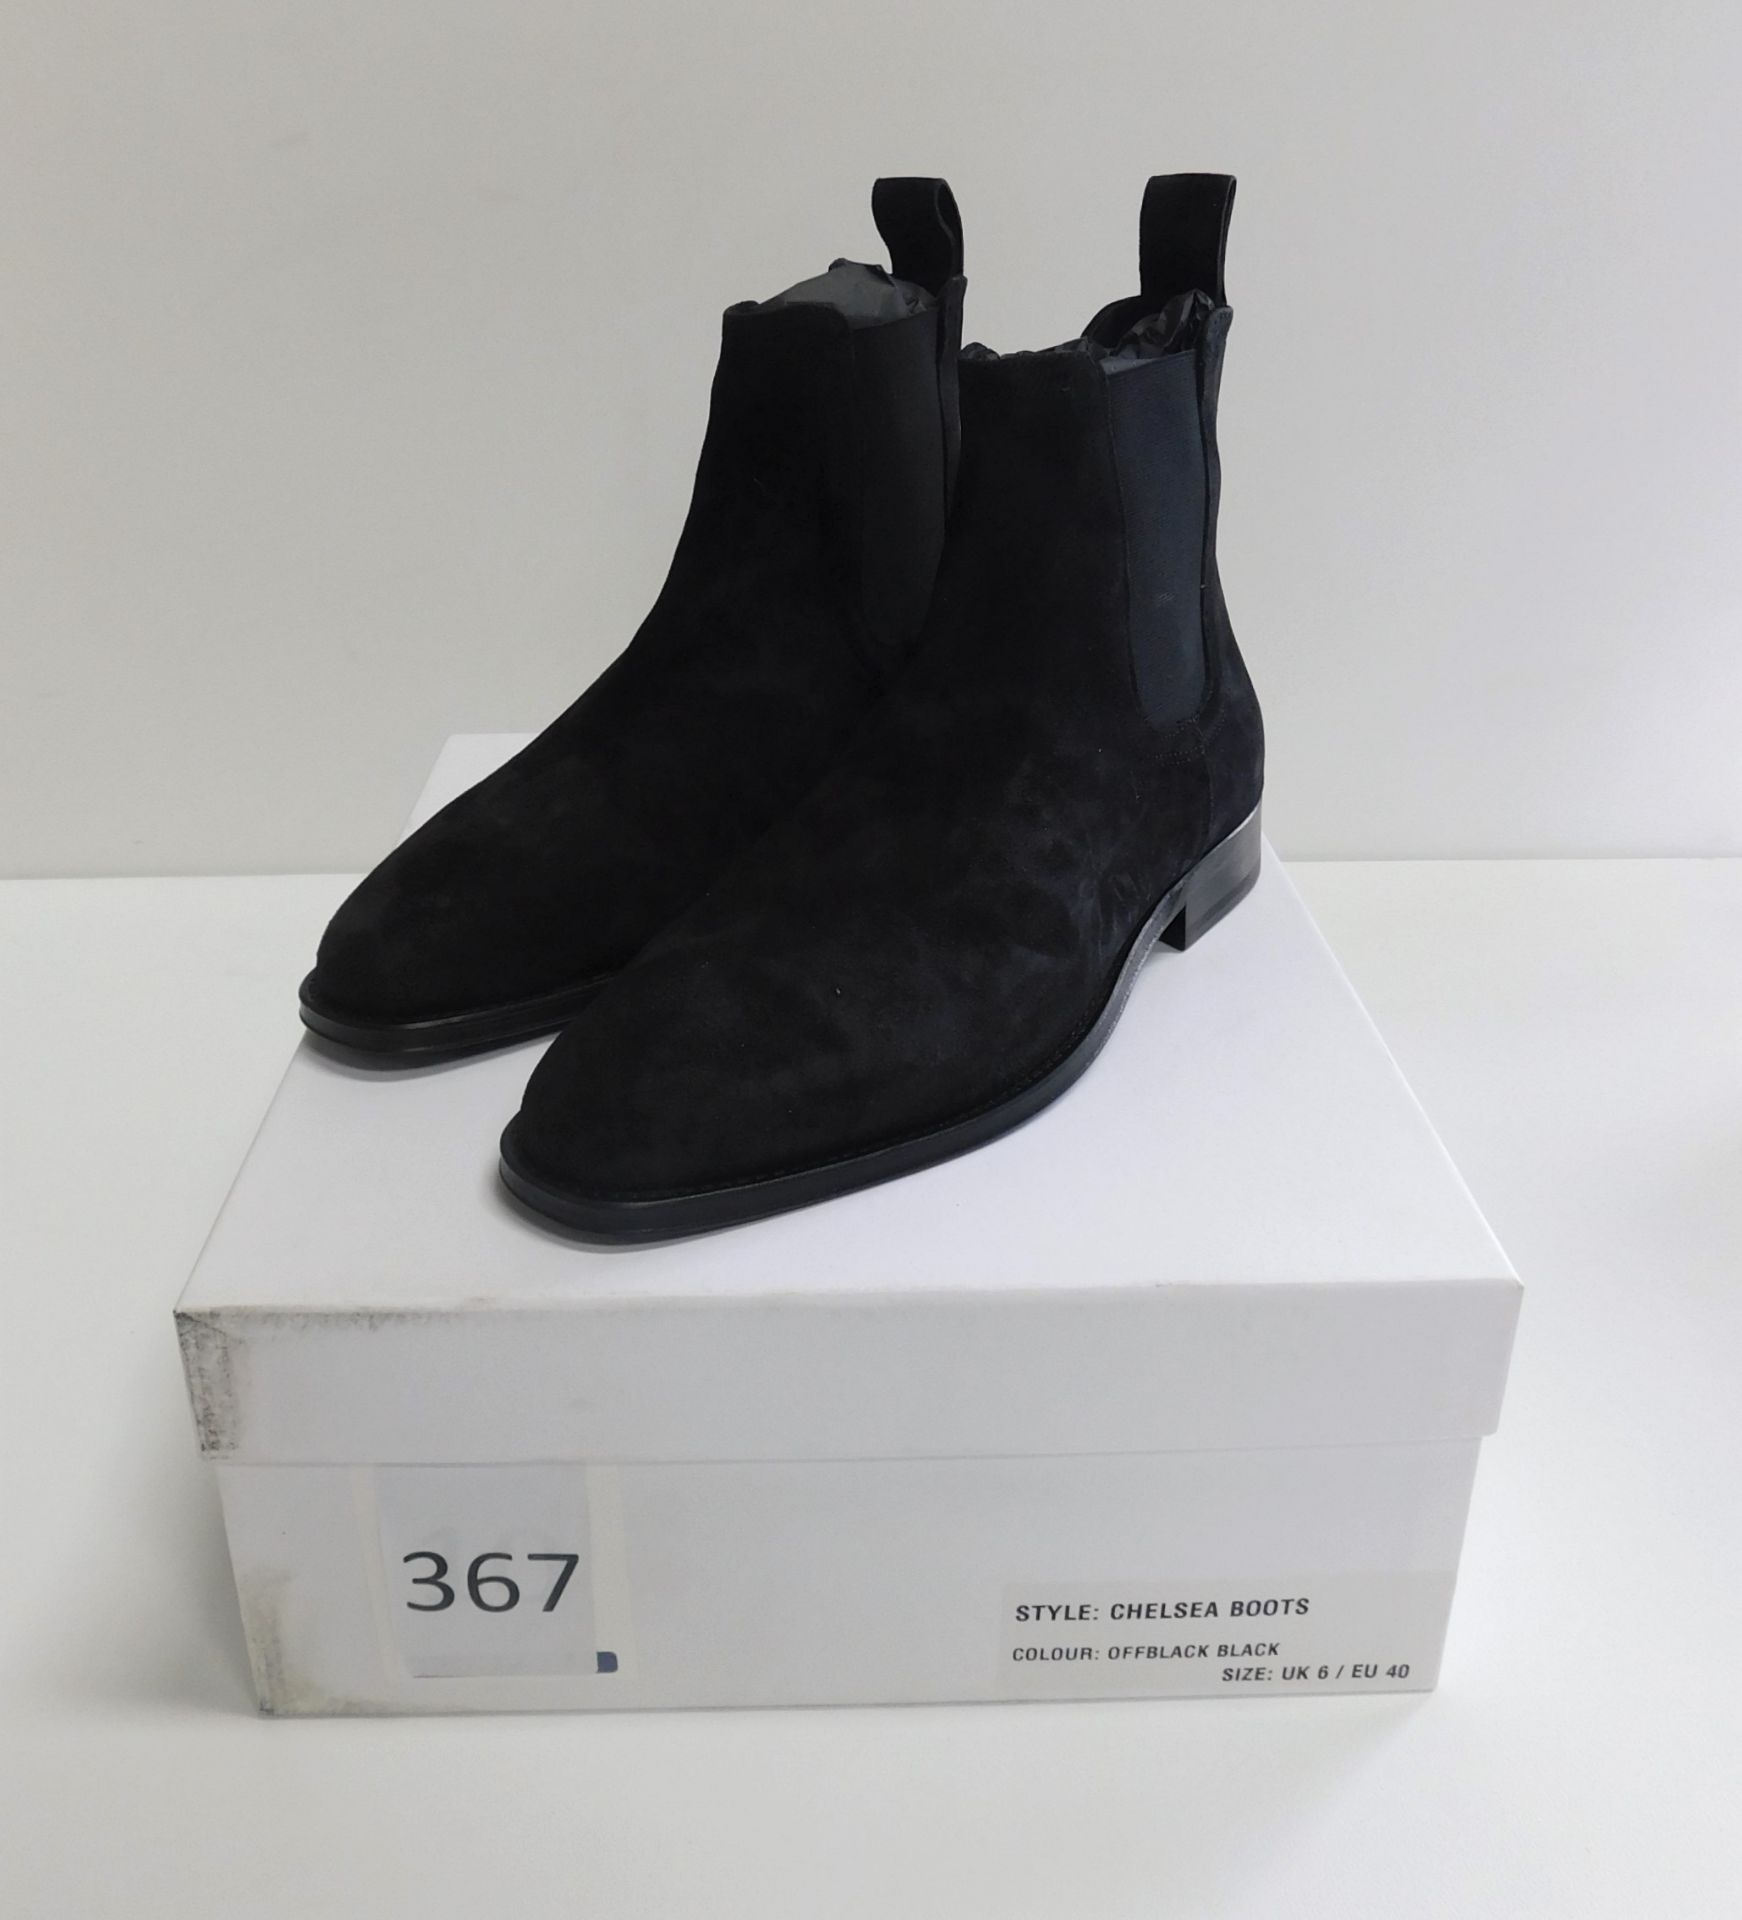 Pair of Ardent “Offblack Black” Chelsea Boots, Size 6 (Located: Brentwood. Please Refer to General